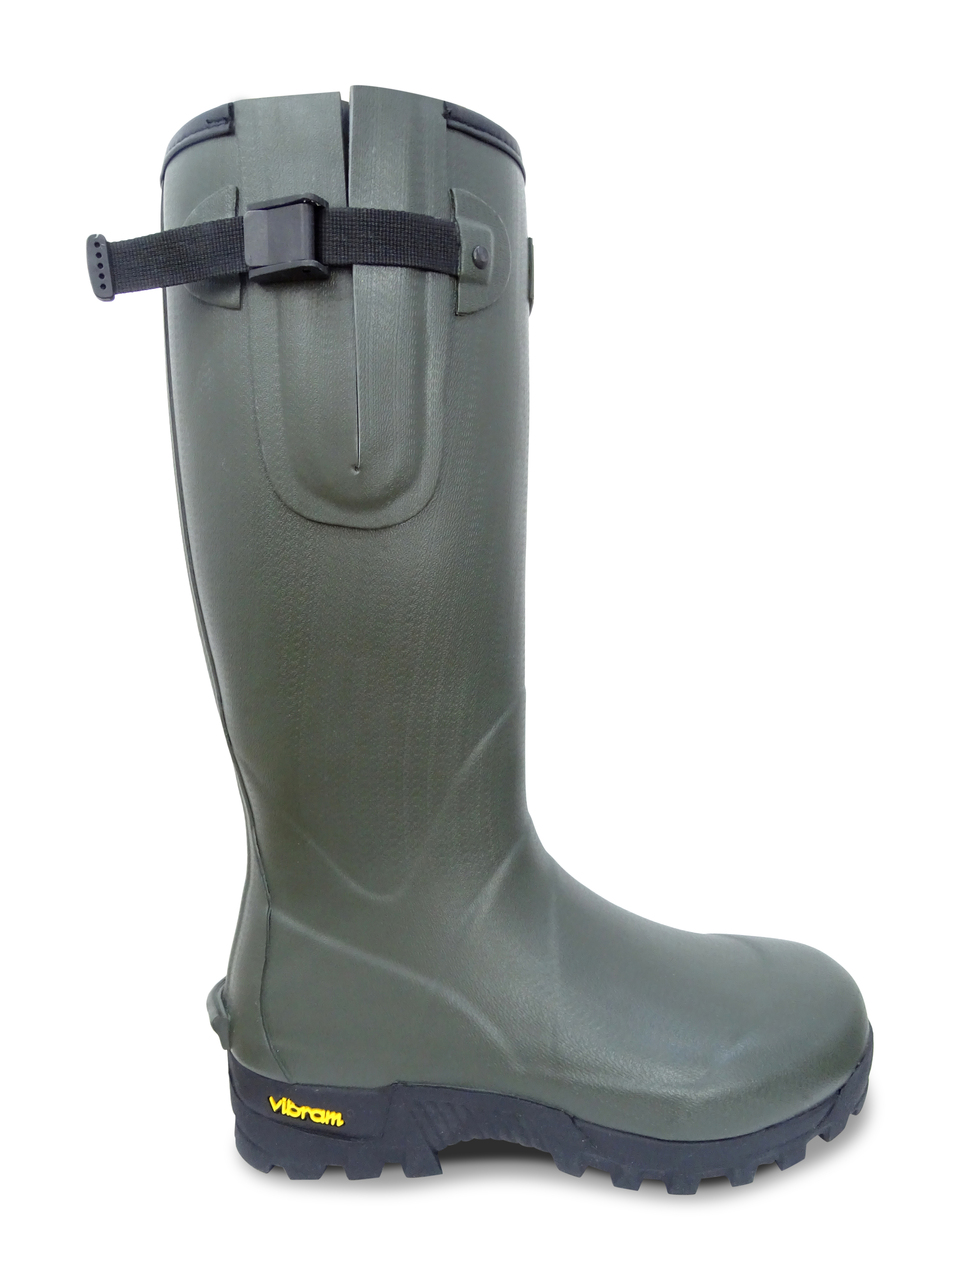 Rubber Boots Buyer's Guide